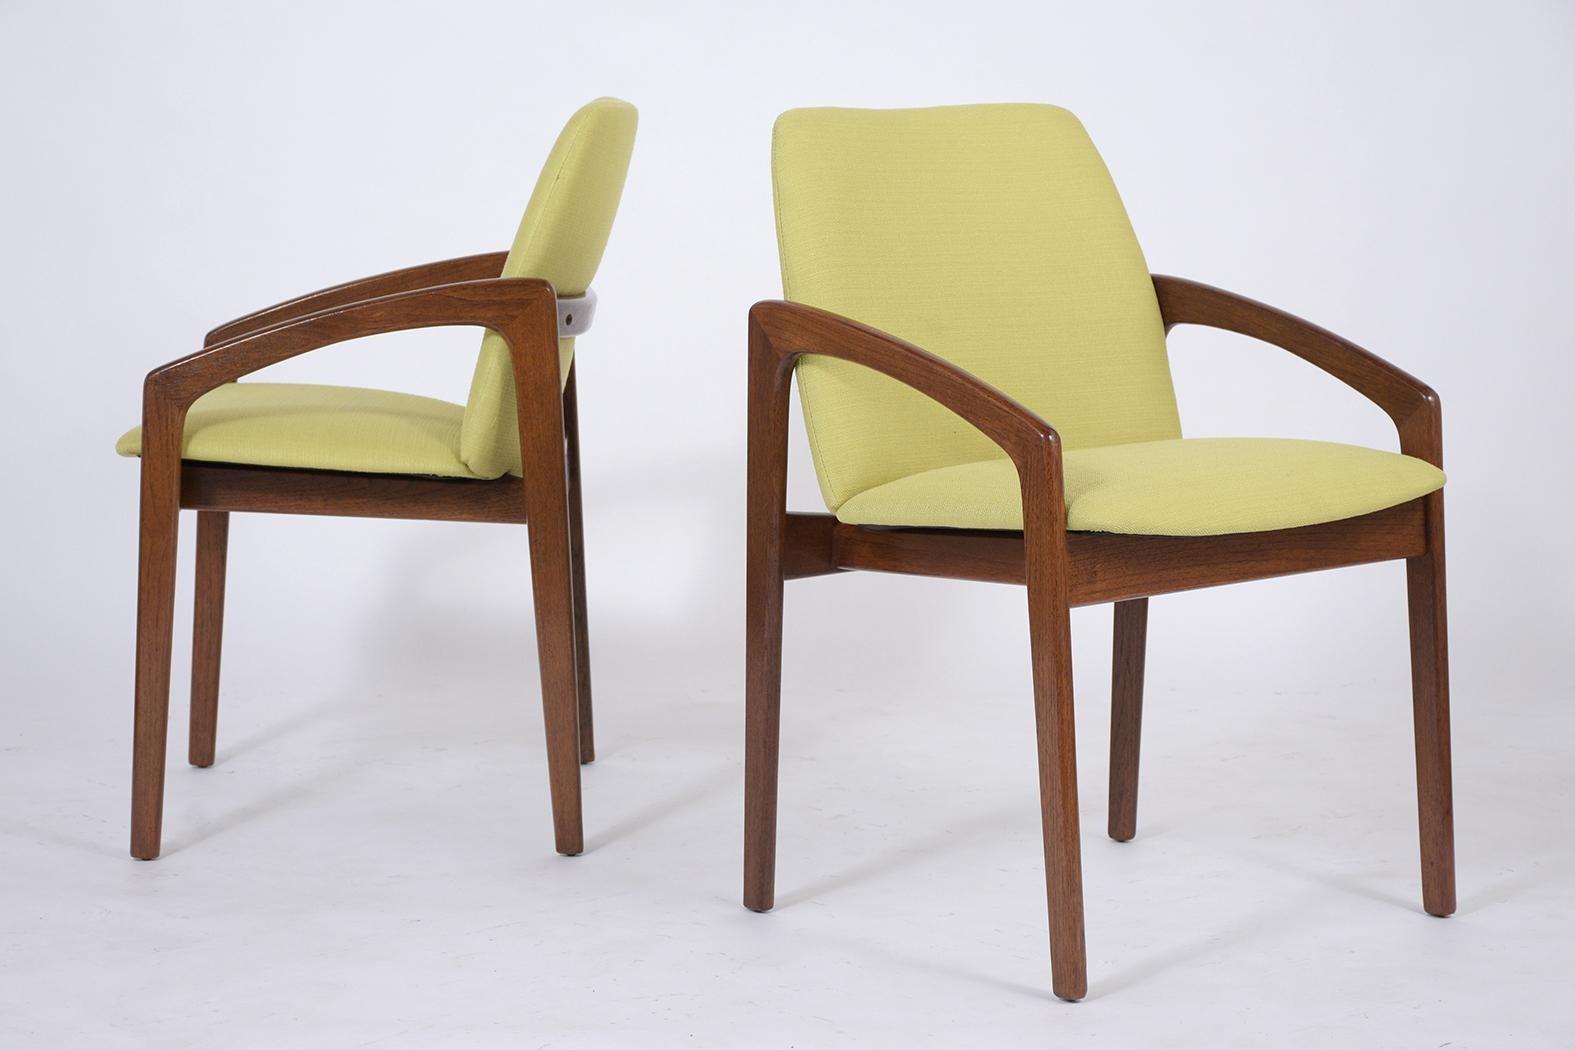 This pair of vintage 1960 mid century modern armchairs are crafted out of teak wood with a newly stained rich mahogany color lacquered finish and have been completely restored by our team of expert craftsmen in house. The set of side chairs have